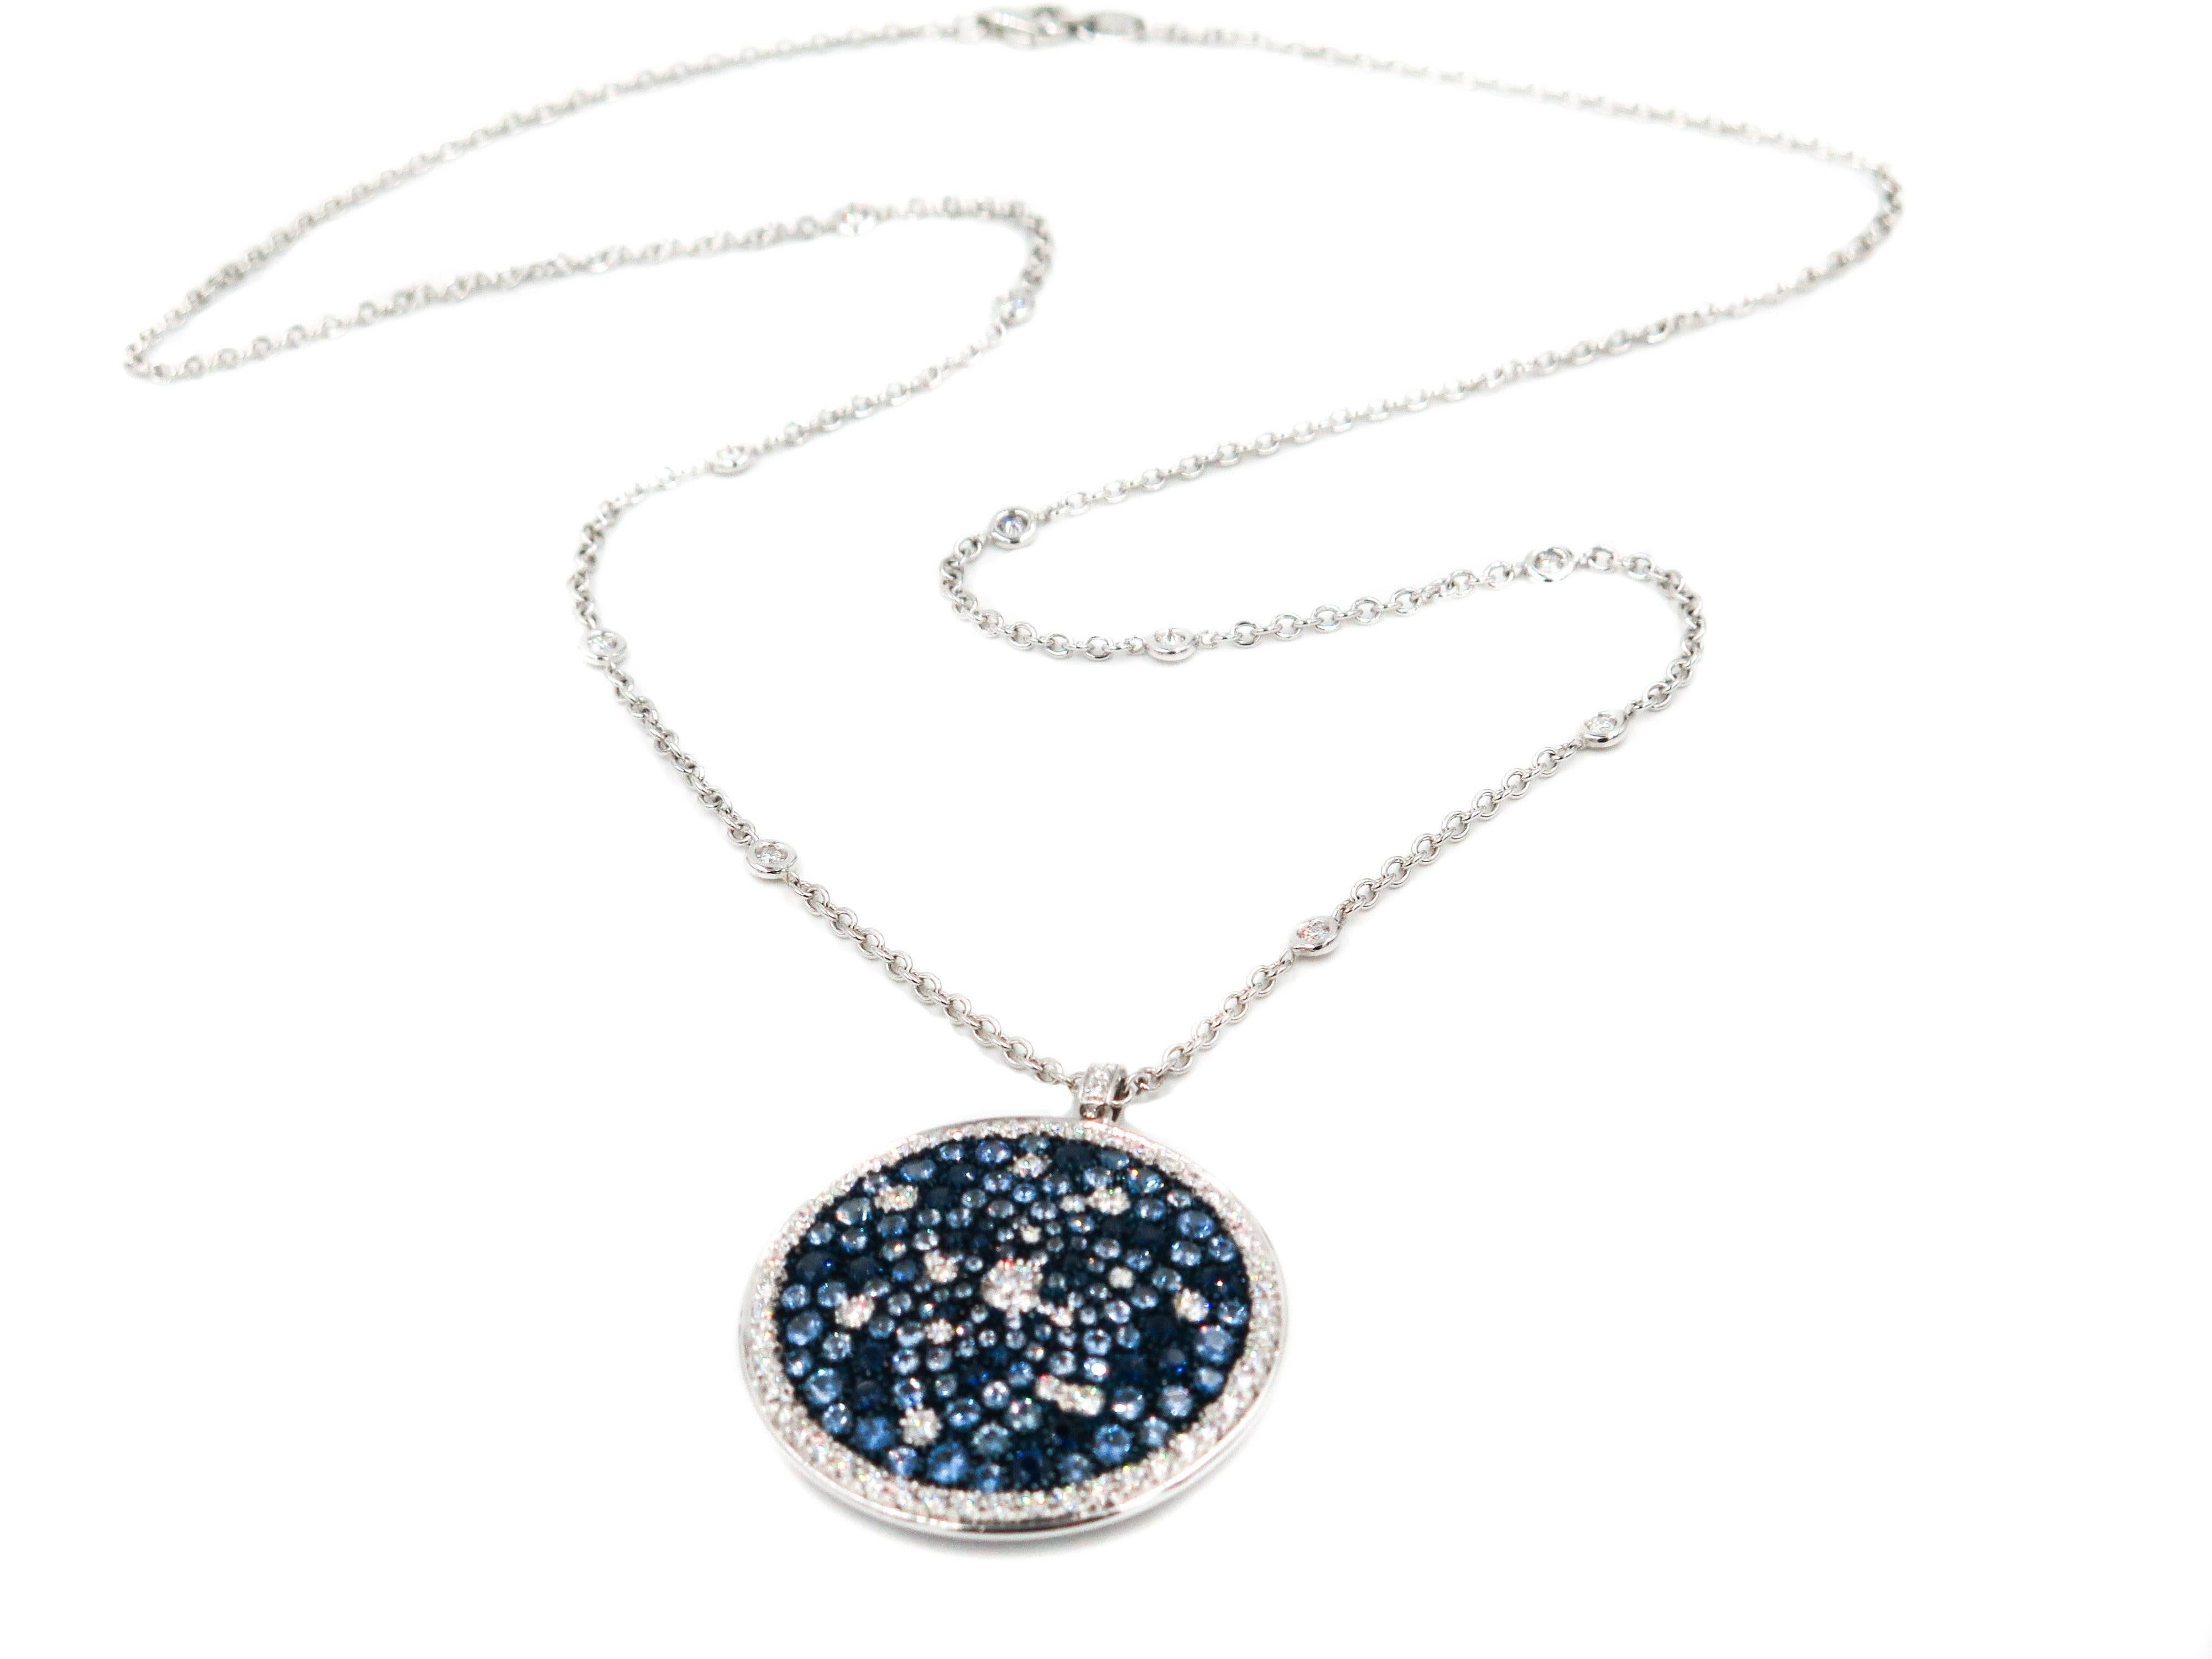 The gifted hands of the master craftsmen at Leo Pizzo brings to life this precious pendant that will seduce your style, the main focus for all our creations.
Created with multiple sizes and hues of blue sapphires and white round diamonds using the